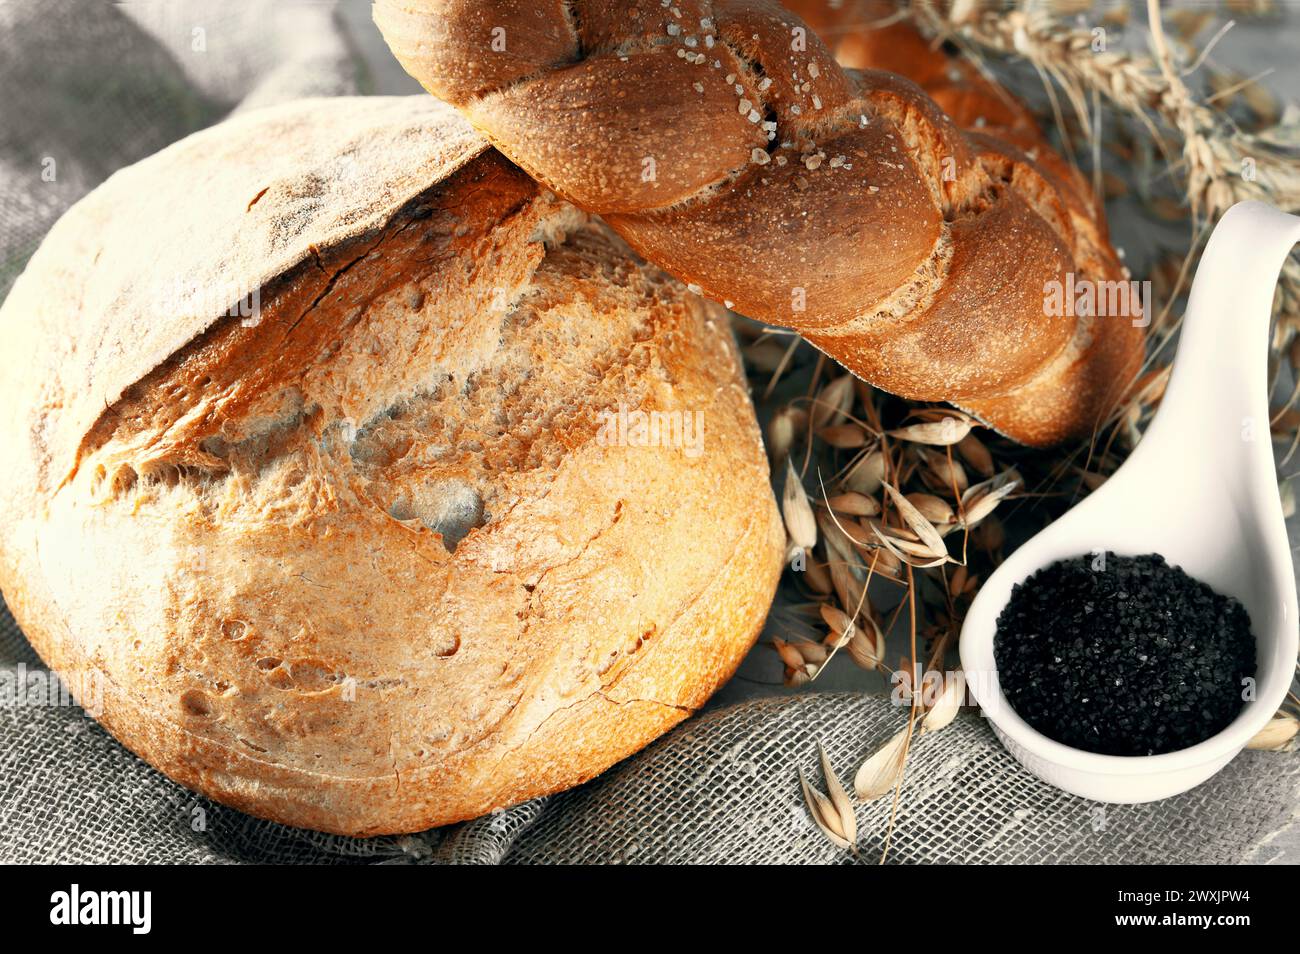 Round white bread. Close-up of homemade white bread with black salt in a white porcelain salt cellar. Close-up. Stock Photo